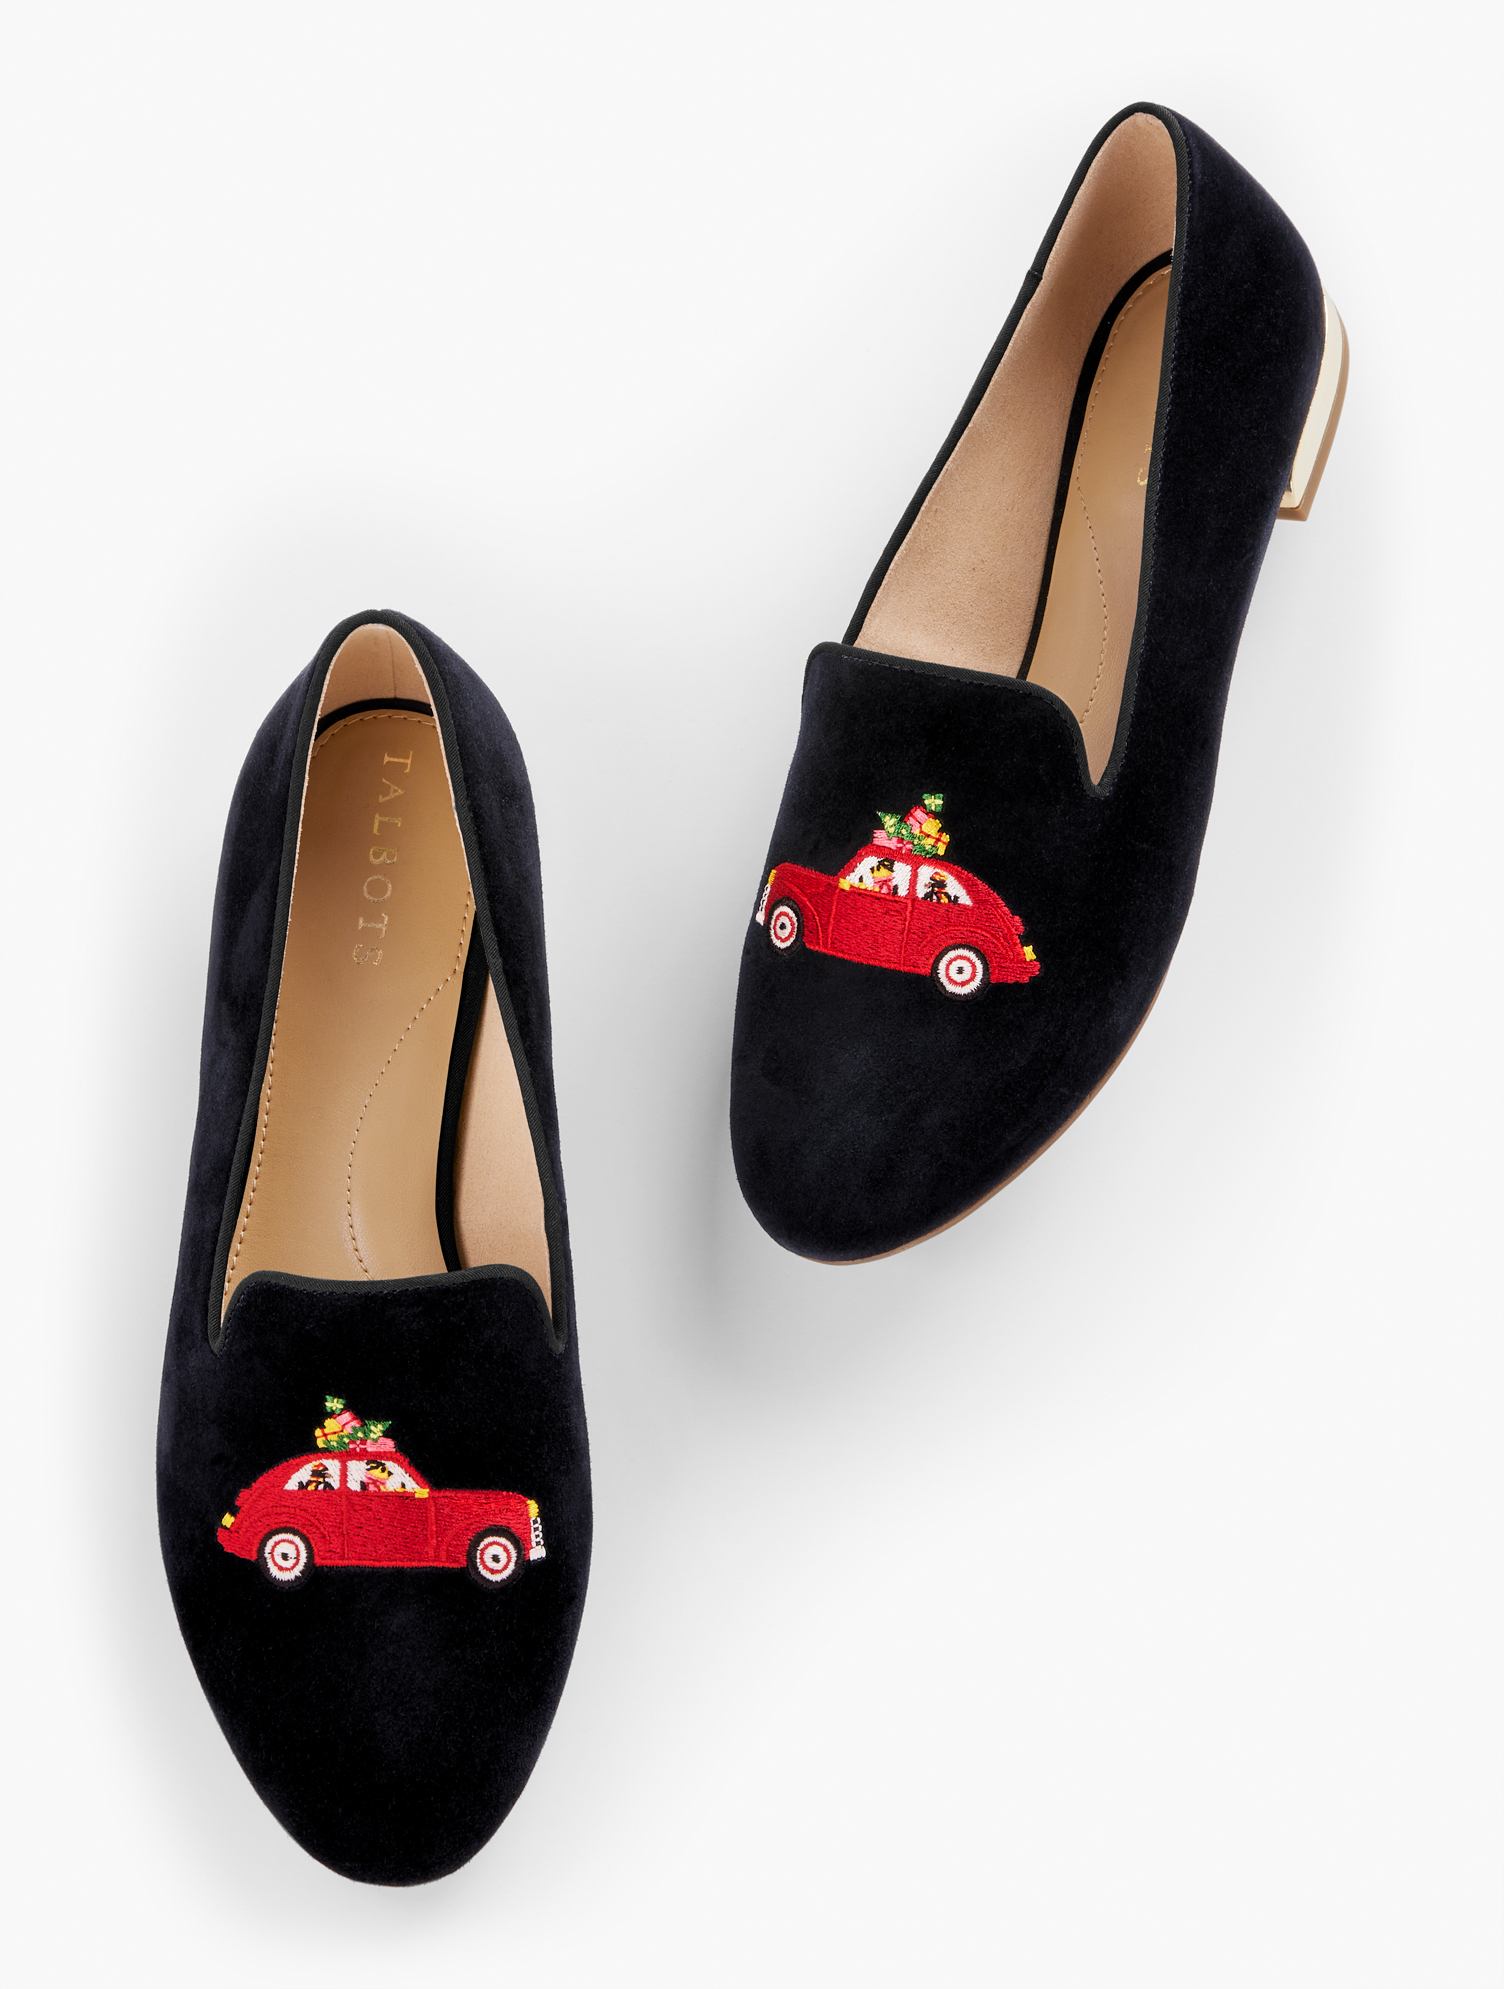 Talbots Ryan Embroidered Suede Loafers - Black - 9m